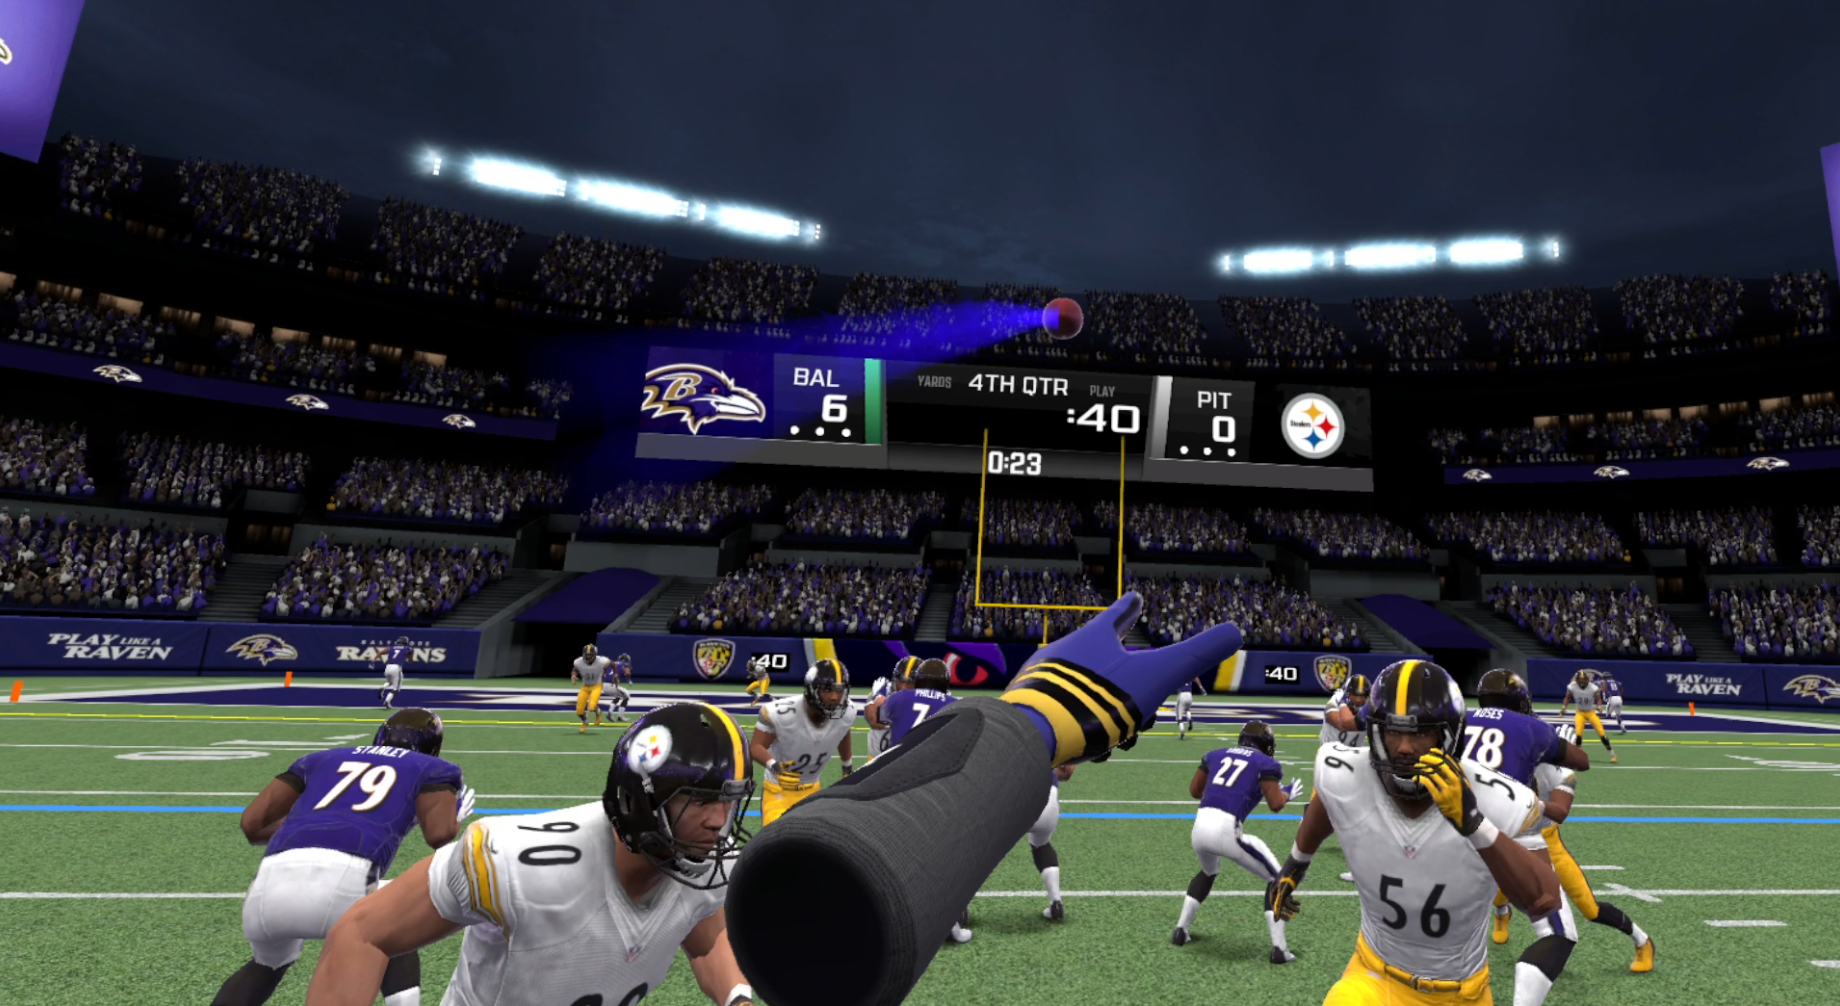 A screenshot showing gameplay action from NFL PRO ERA.